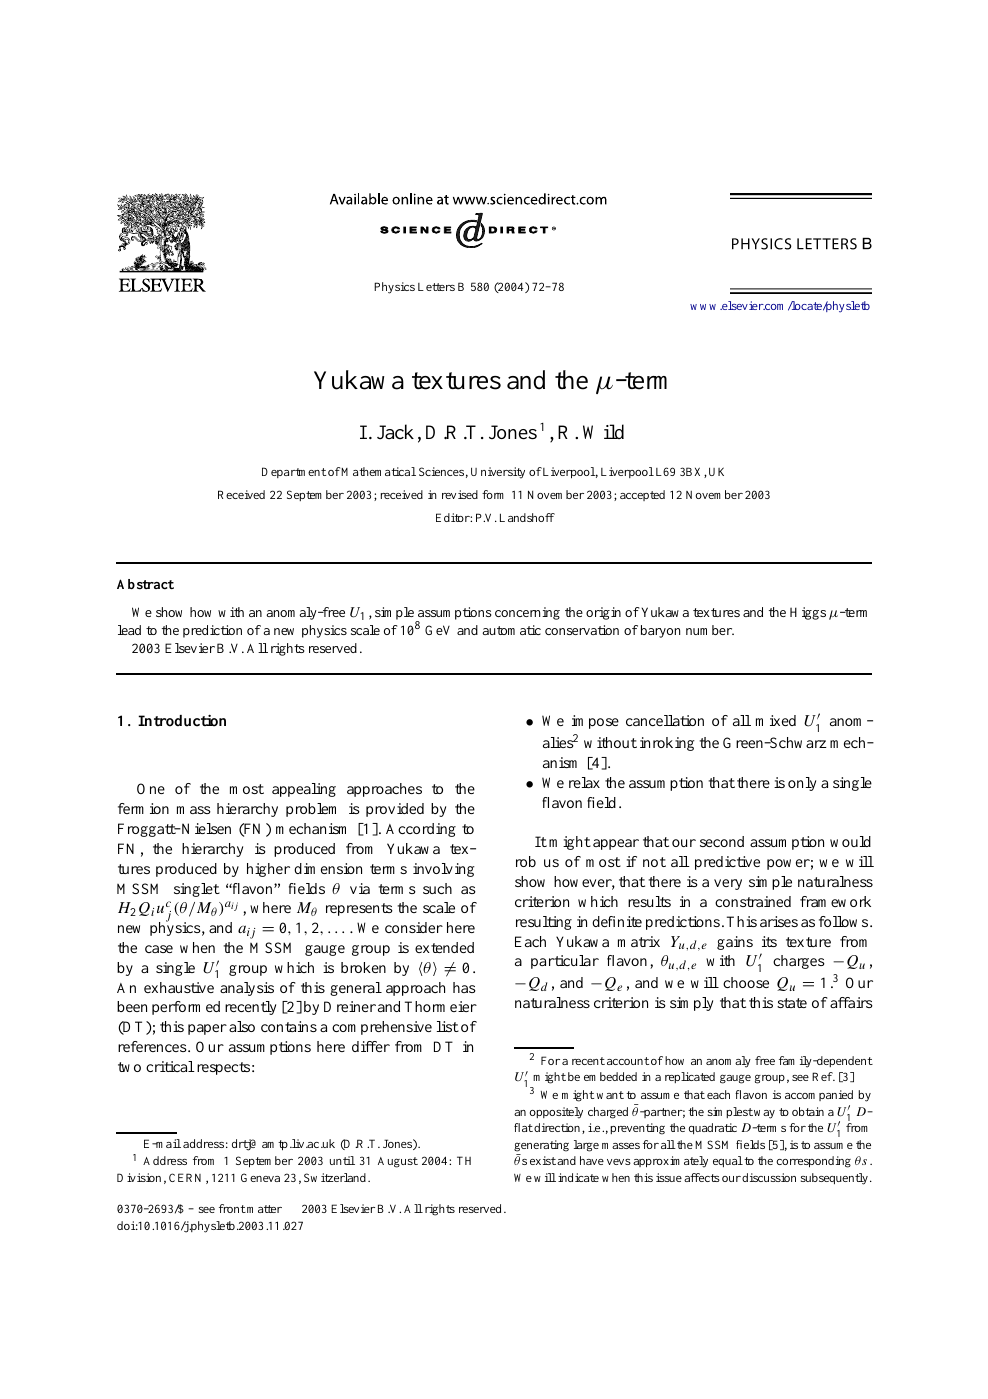 Yukawa Textures And The M Term Topic Of Research Paper In Physical Sciences Download Scholarly Article Pdf And Read For Free On Cyberleninka Open Science Hub